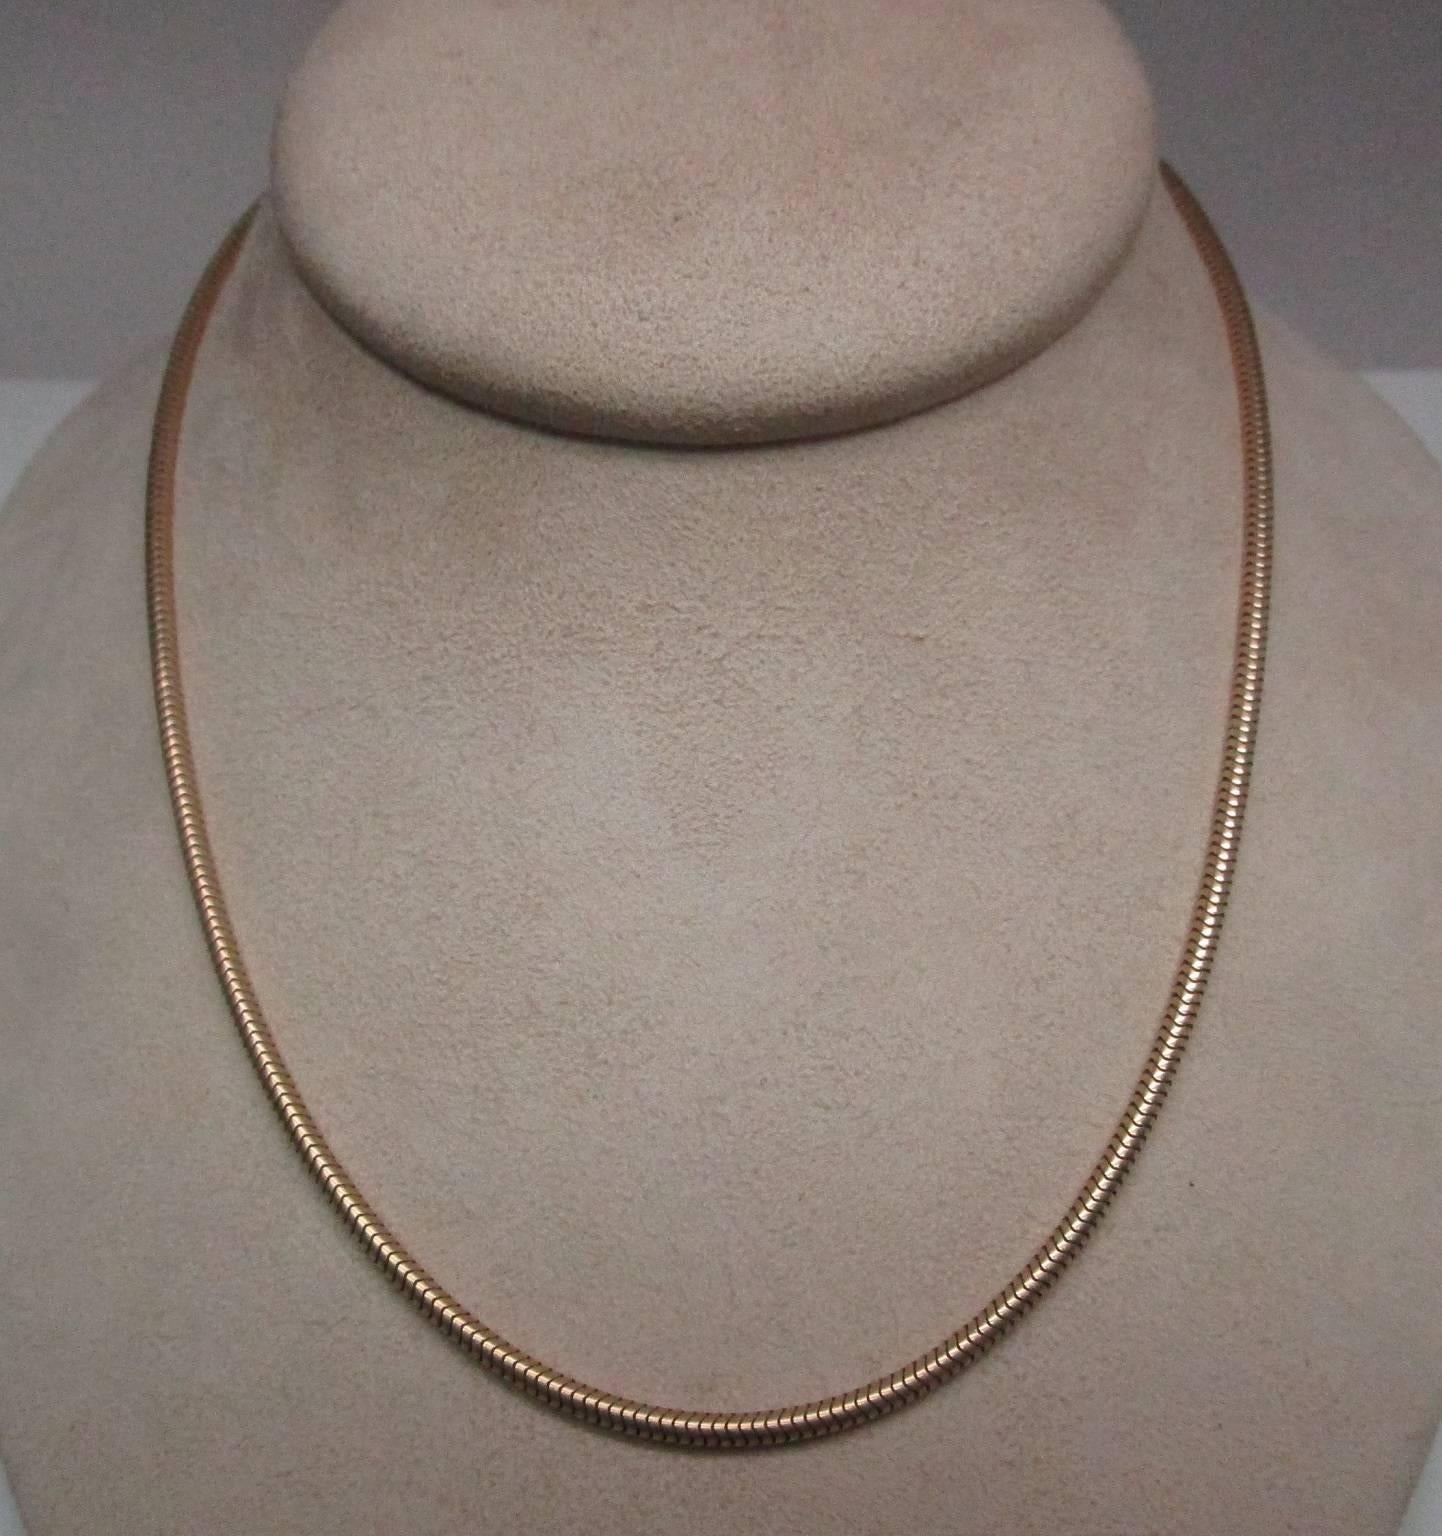 This glorious chain from Tiffany & Co is as classic as you get.  It is as beautiful as the day they produced it. The 14 karat gold will allow you to pair this chain with even the most modern pendant. It is a stout chain that lays well with or